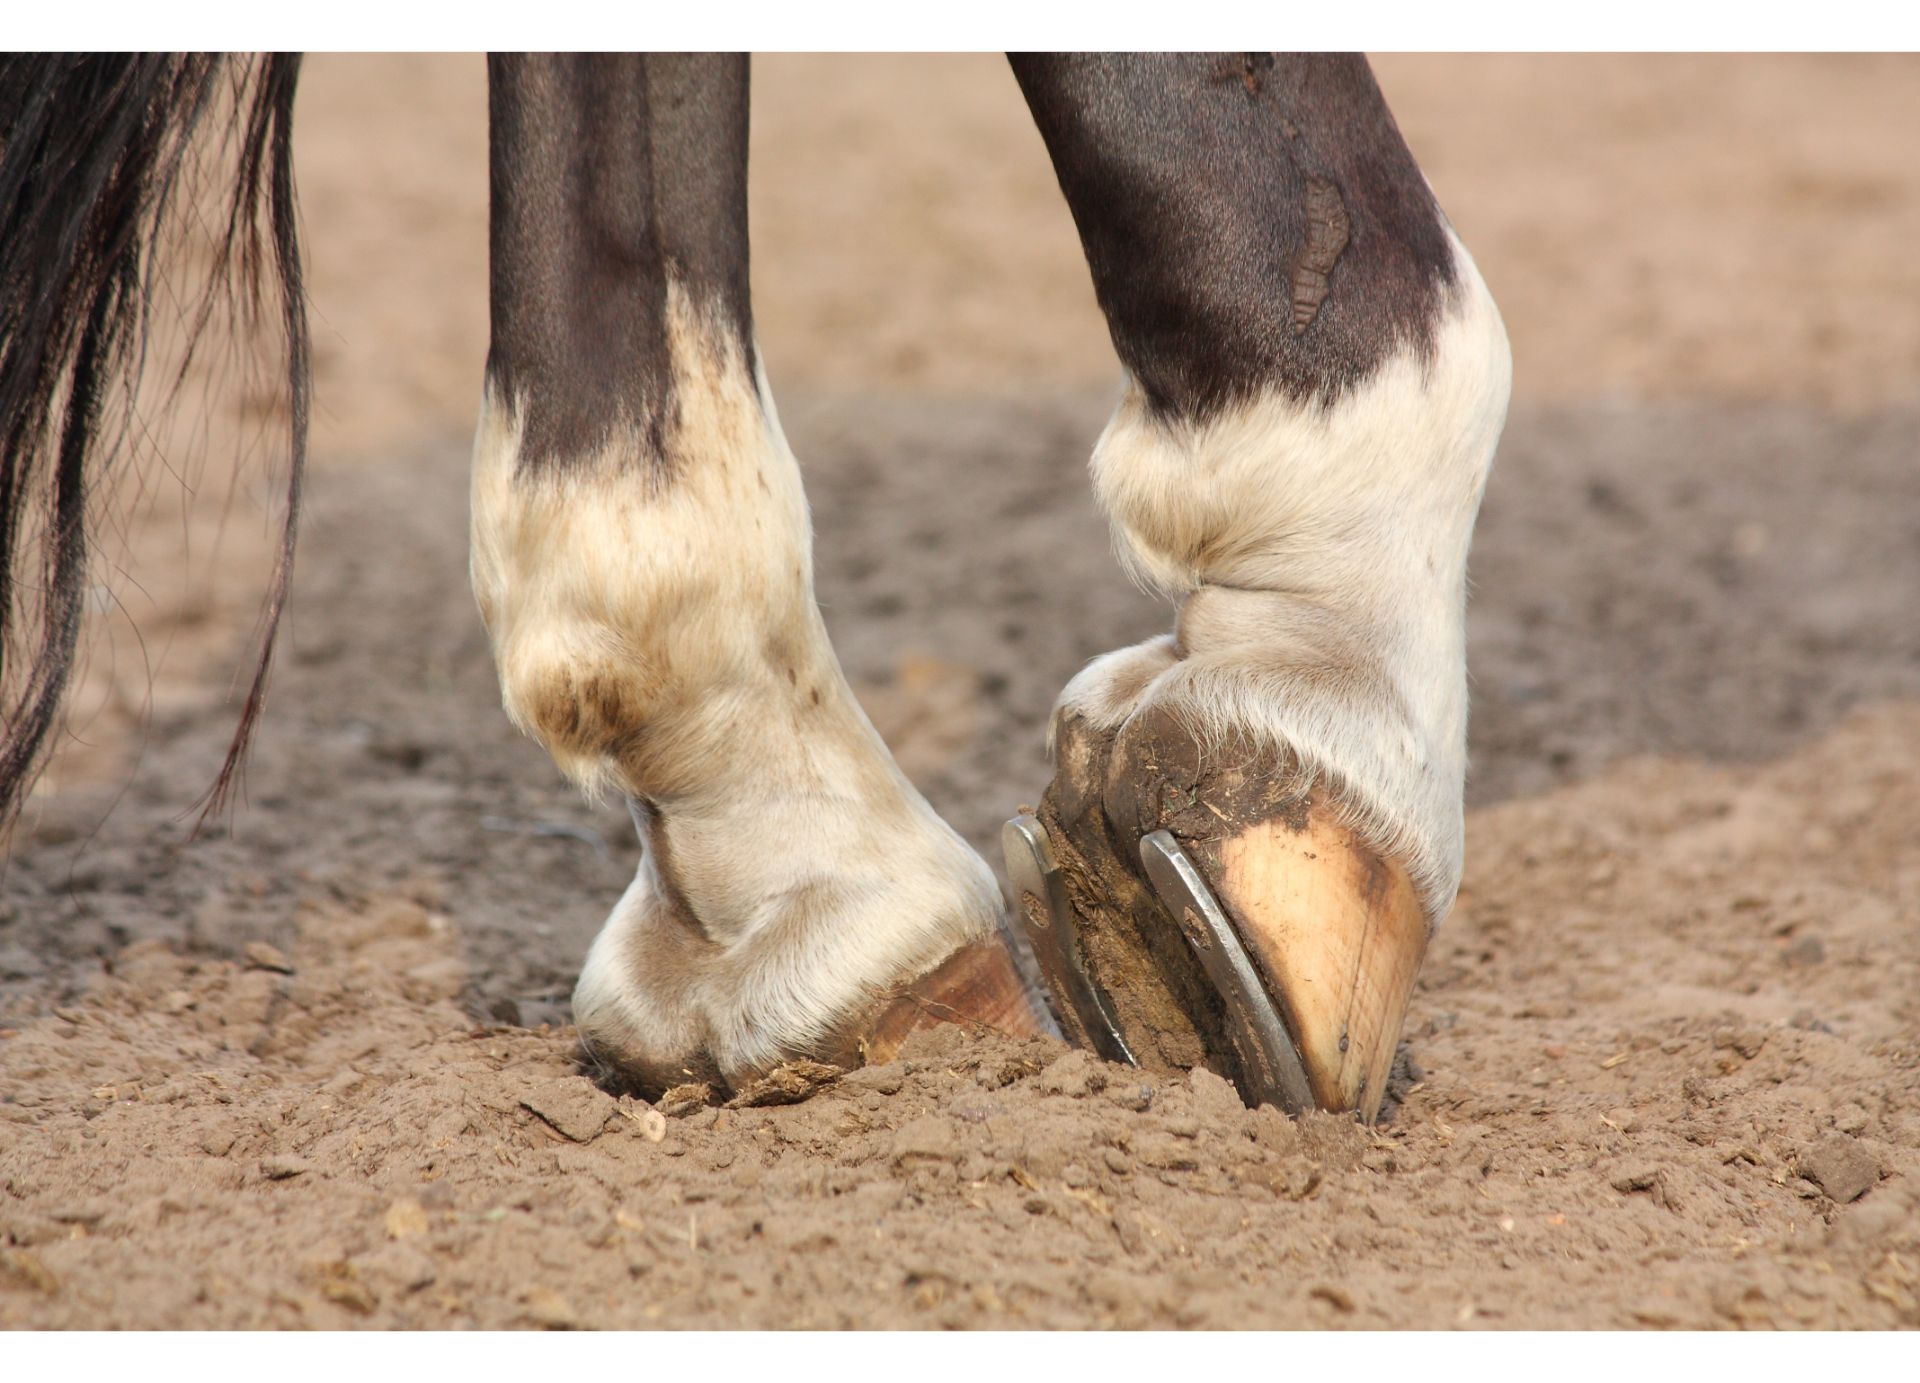 Why do Horses Wear Shoes?